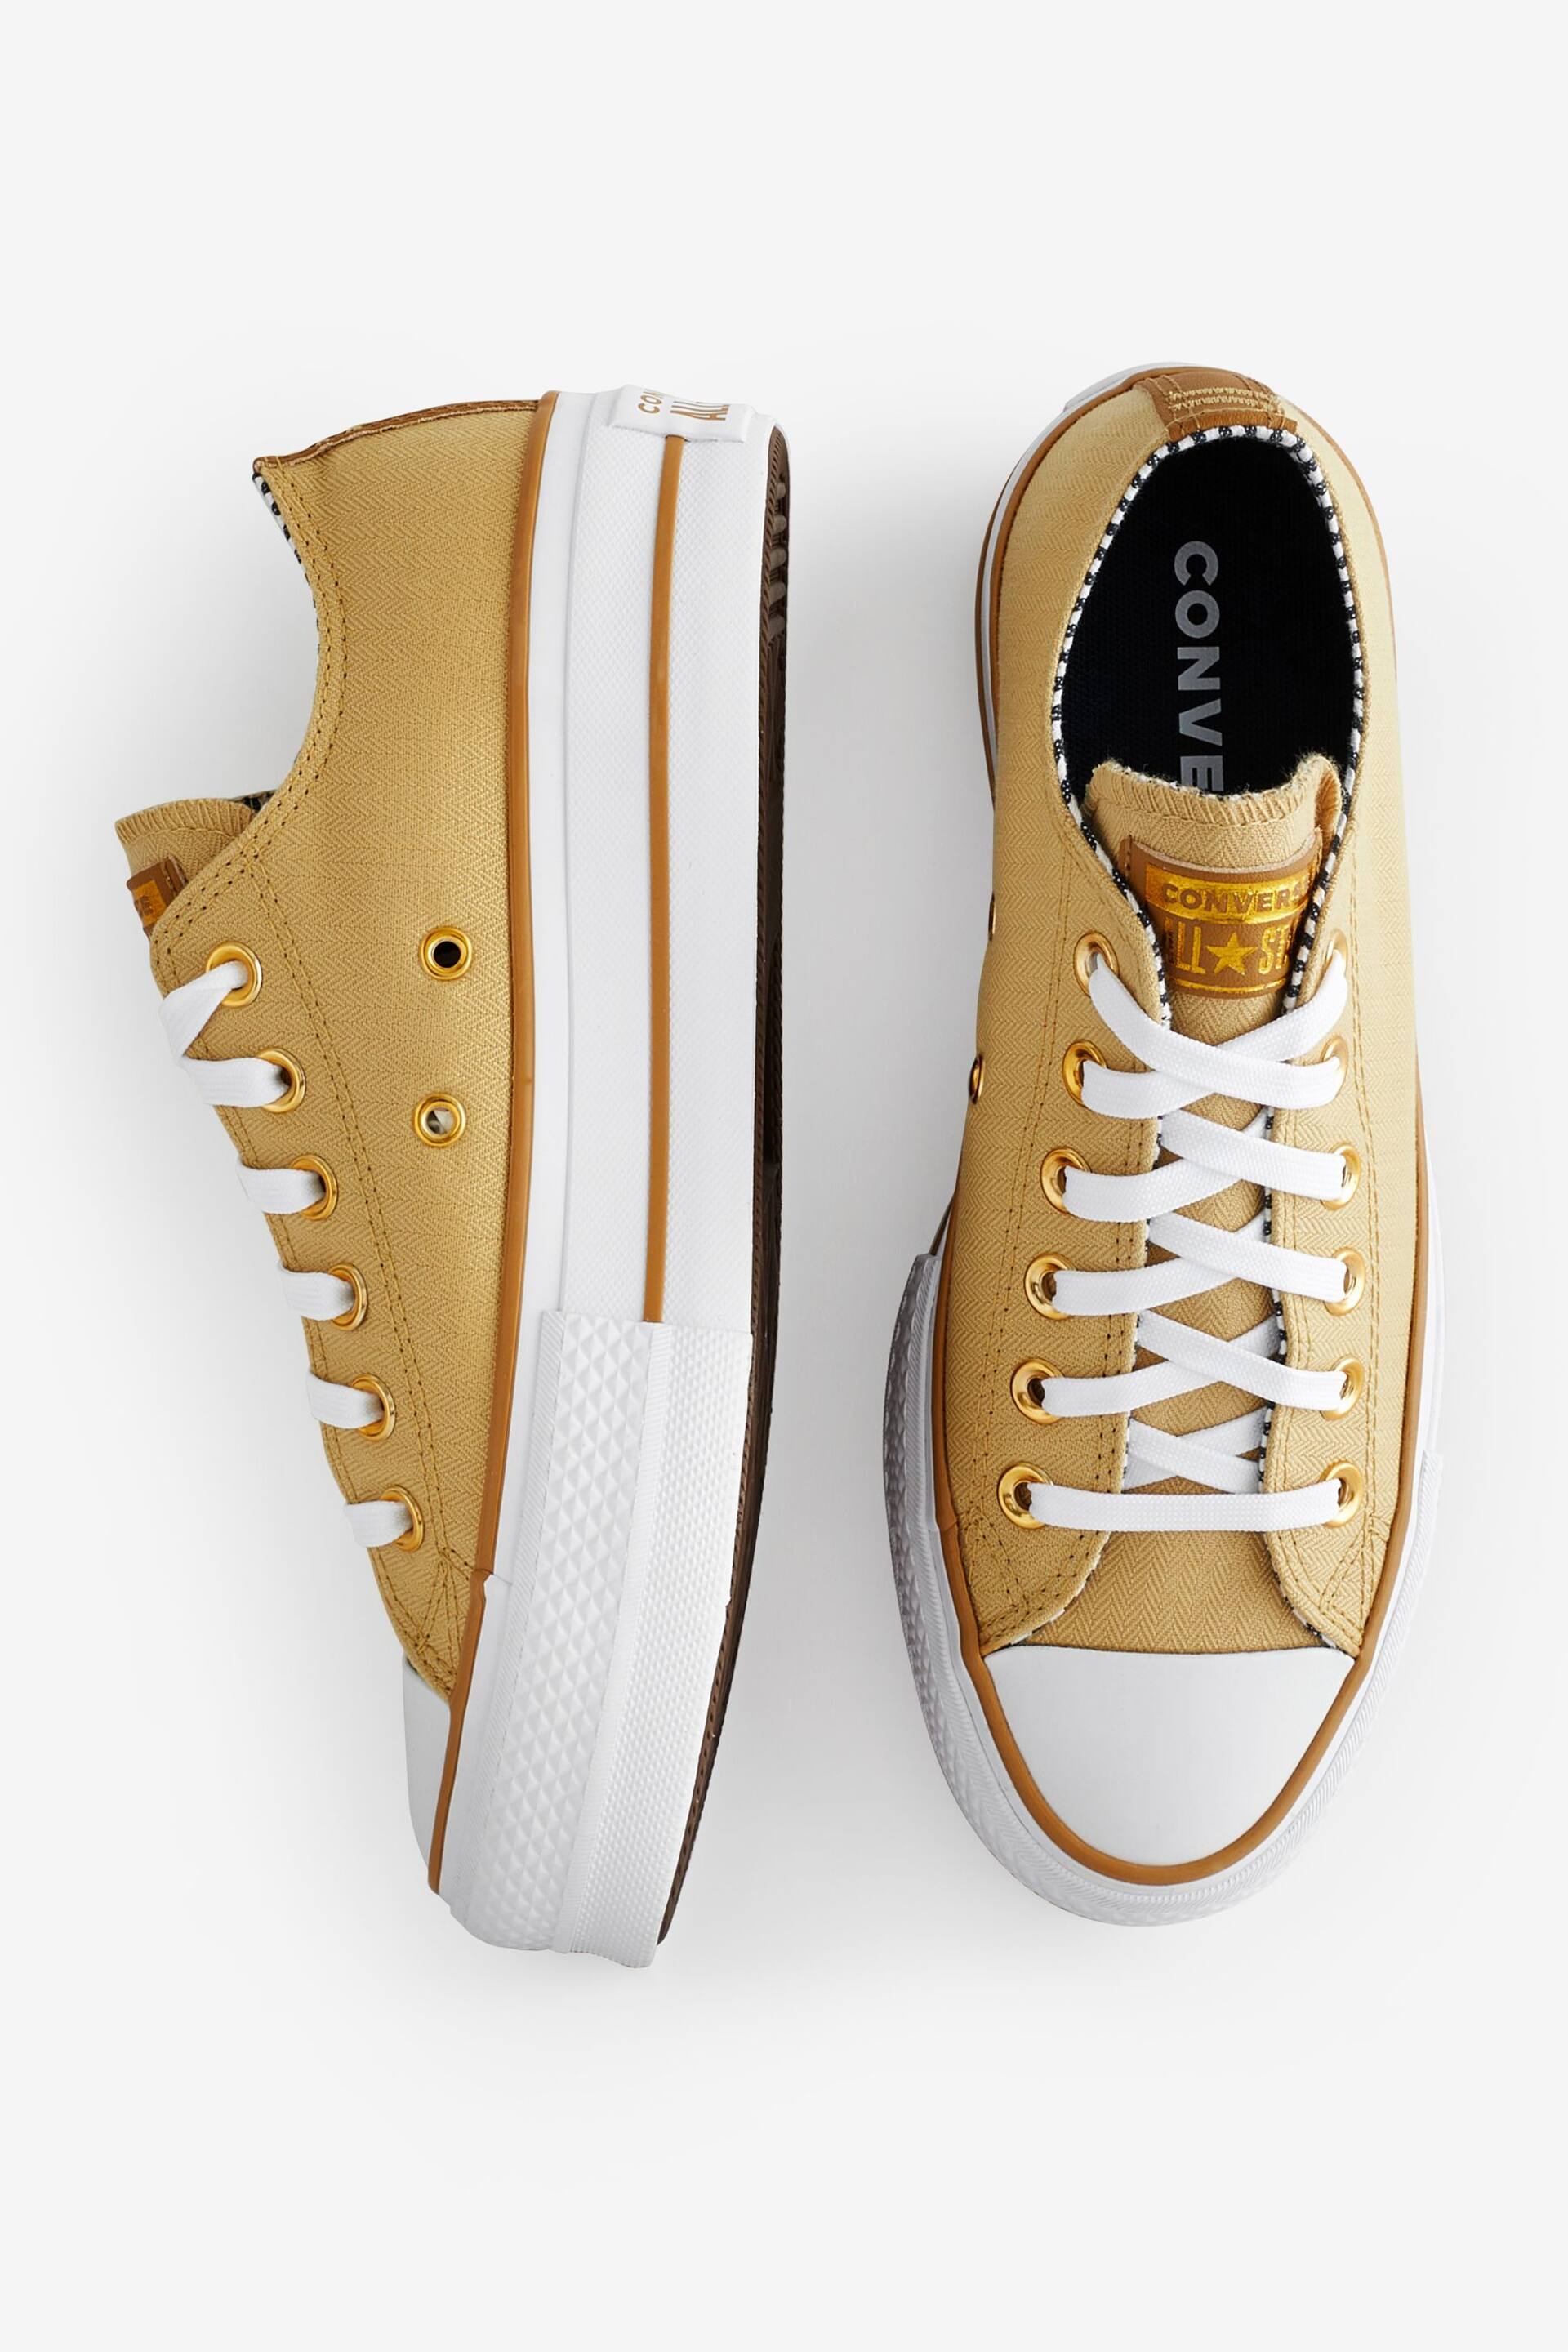 Converse Yellow Lift Chuck Ox Trainers - Image 4 of 9